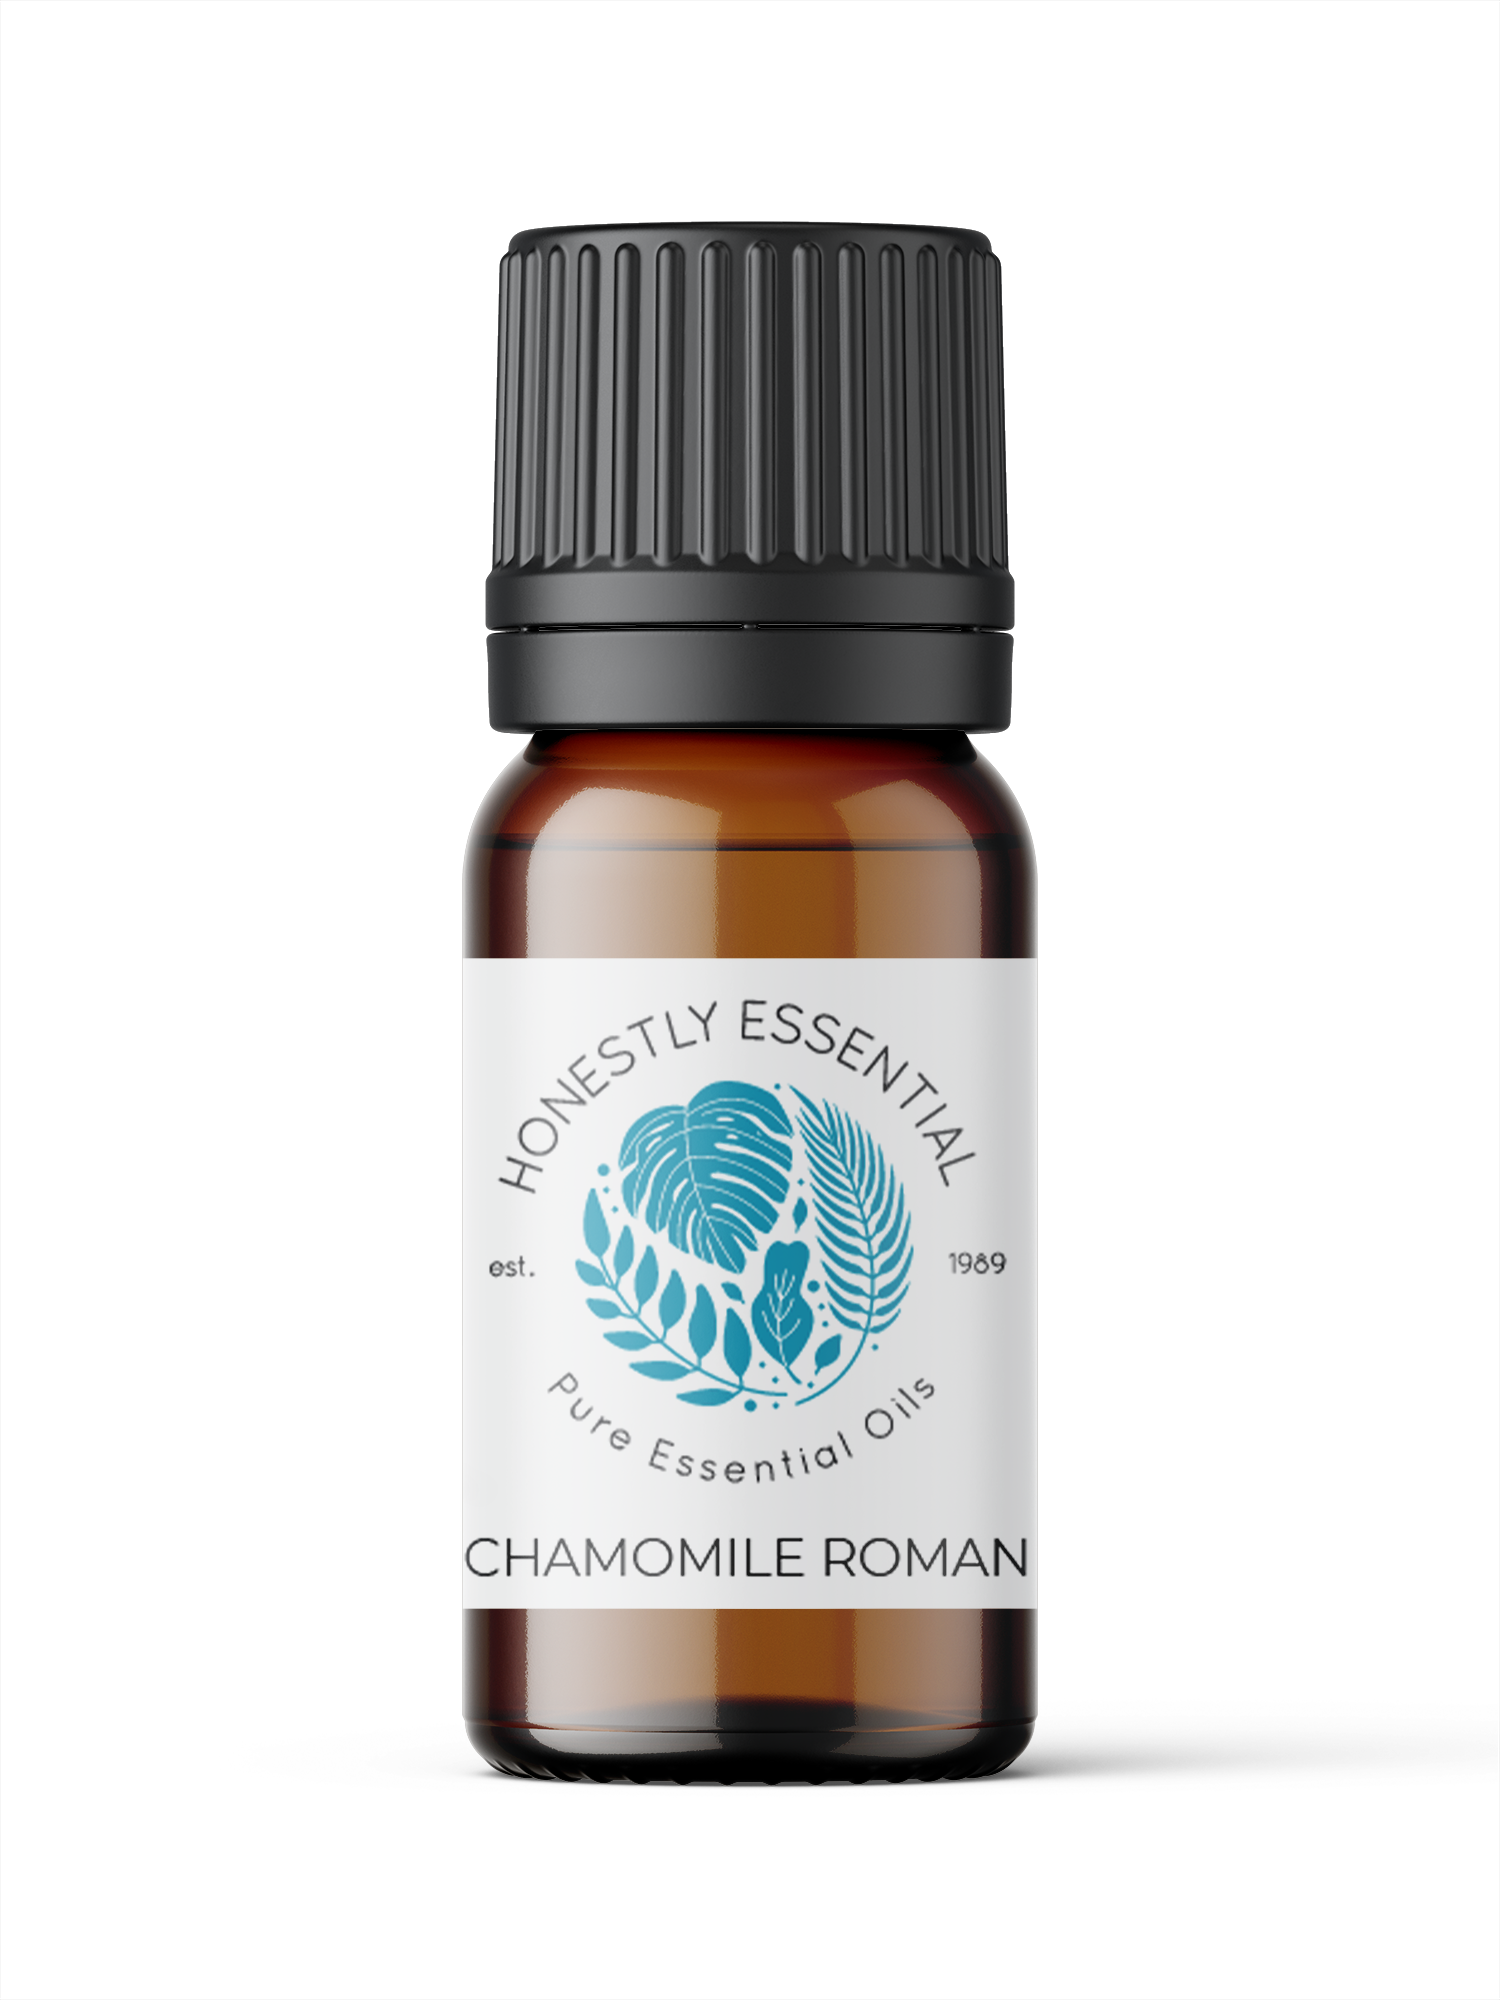 Chamomile Roman Essential Oil - Essential Oils | Honestly Essential Oils anxiety, bruising, depression, flower, flower essential oil, flowers, pain, pain reliever, relaxation, relaxation and 